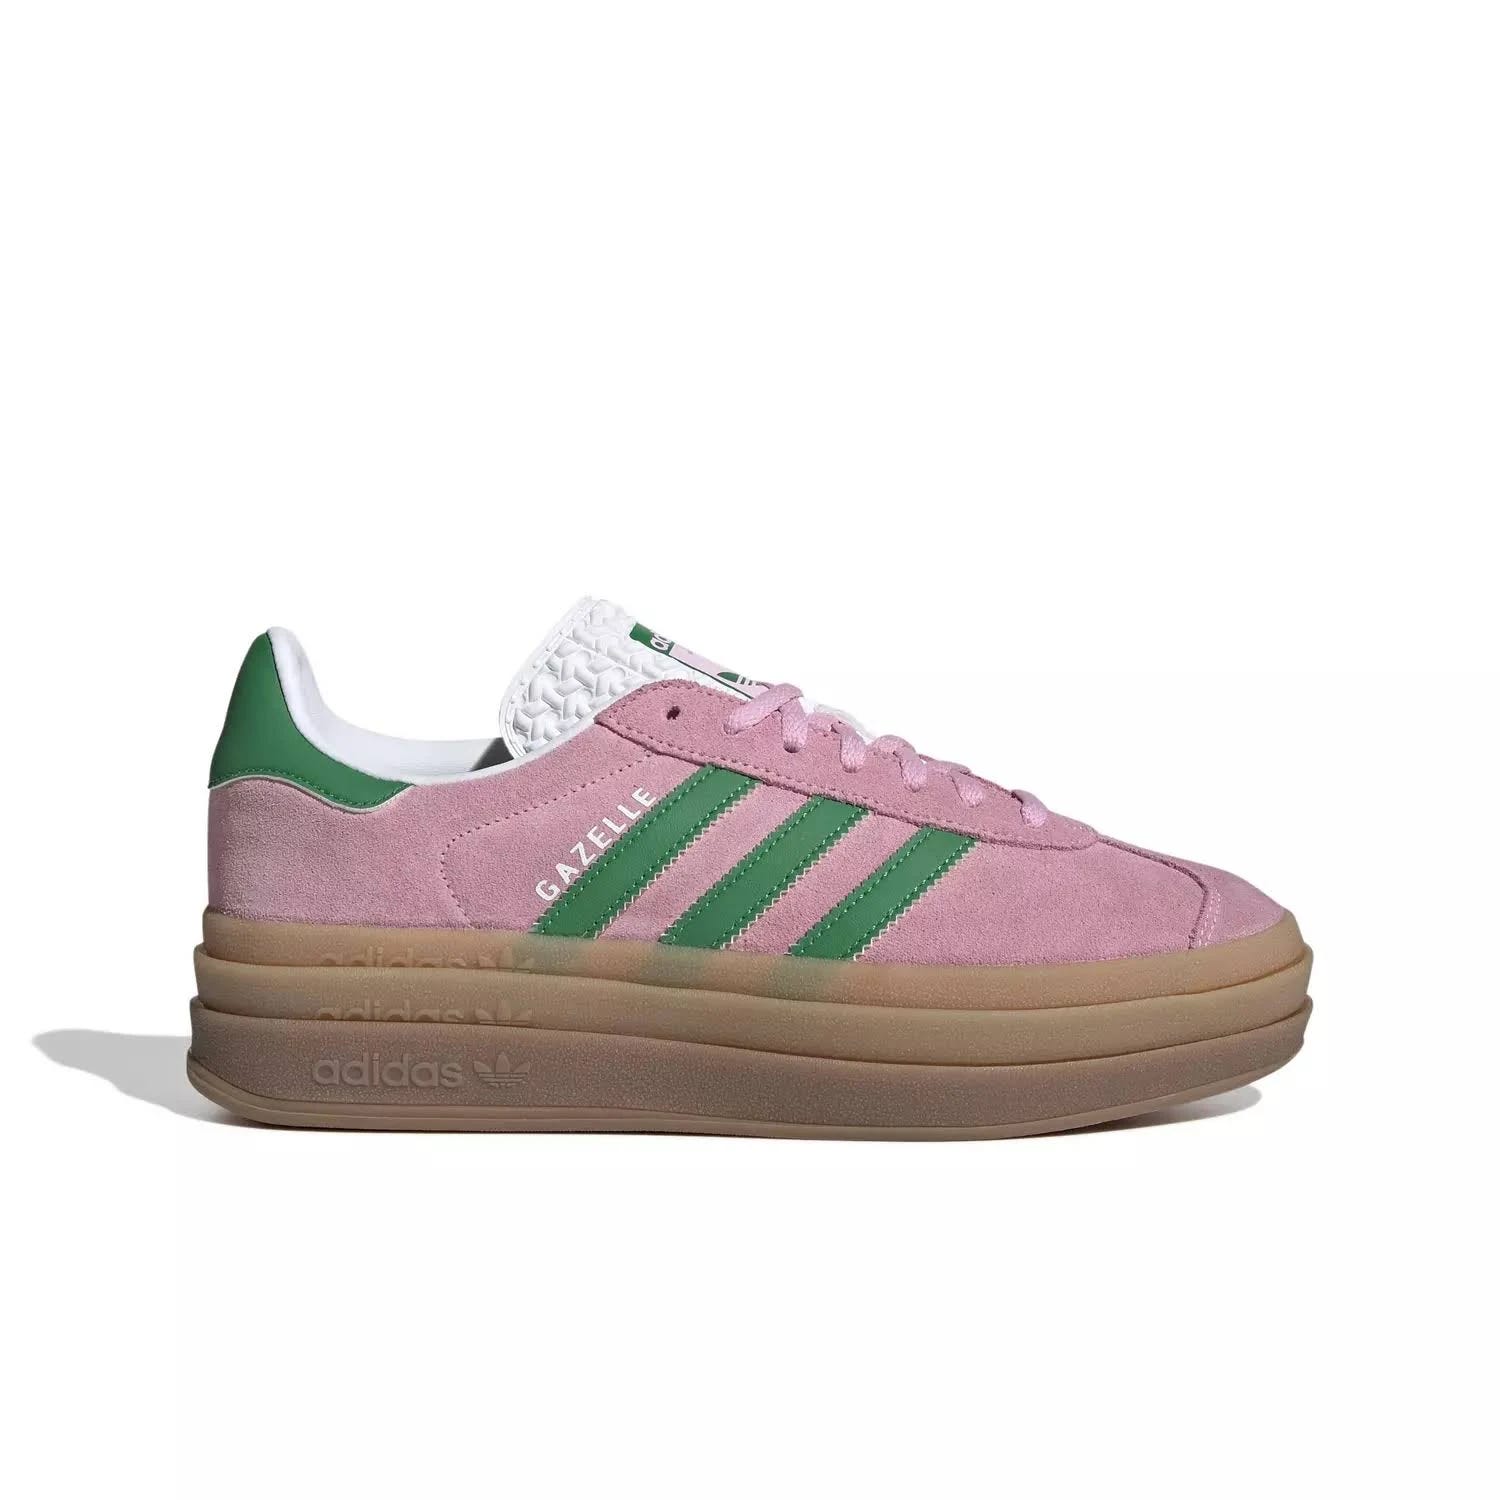 Adorable Pink and Green Adidas Originals Gazelle Bold Shoes | Image